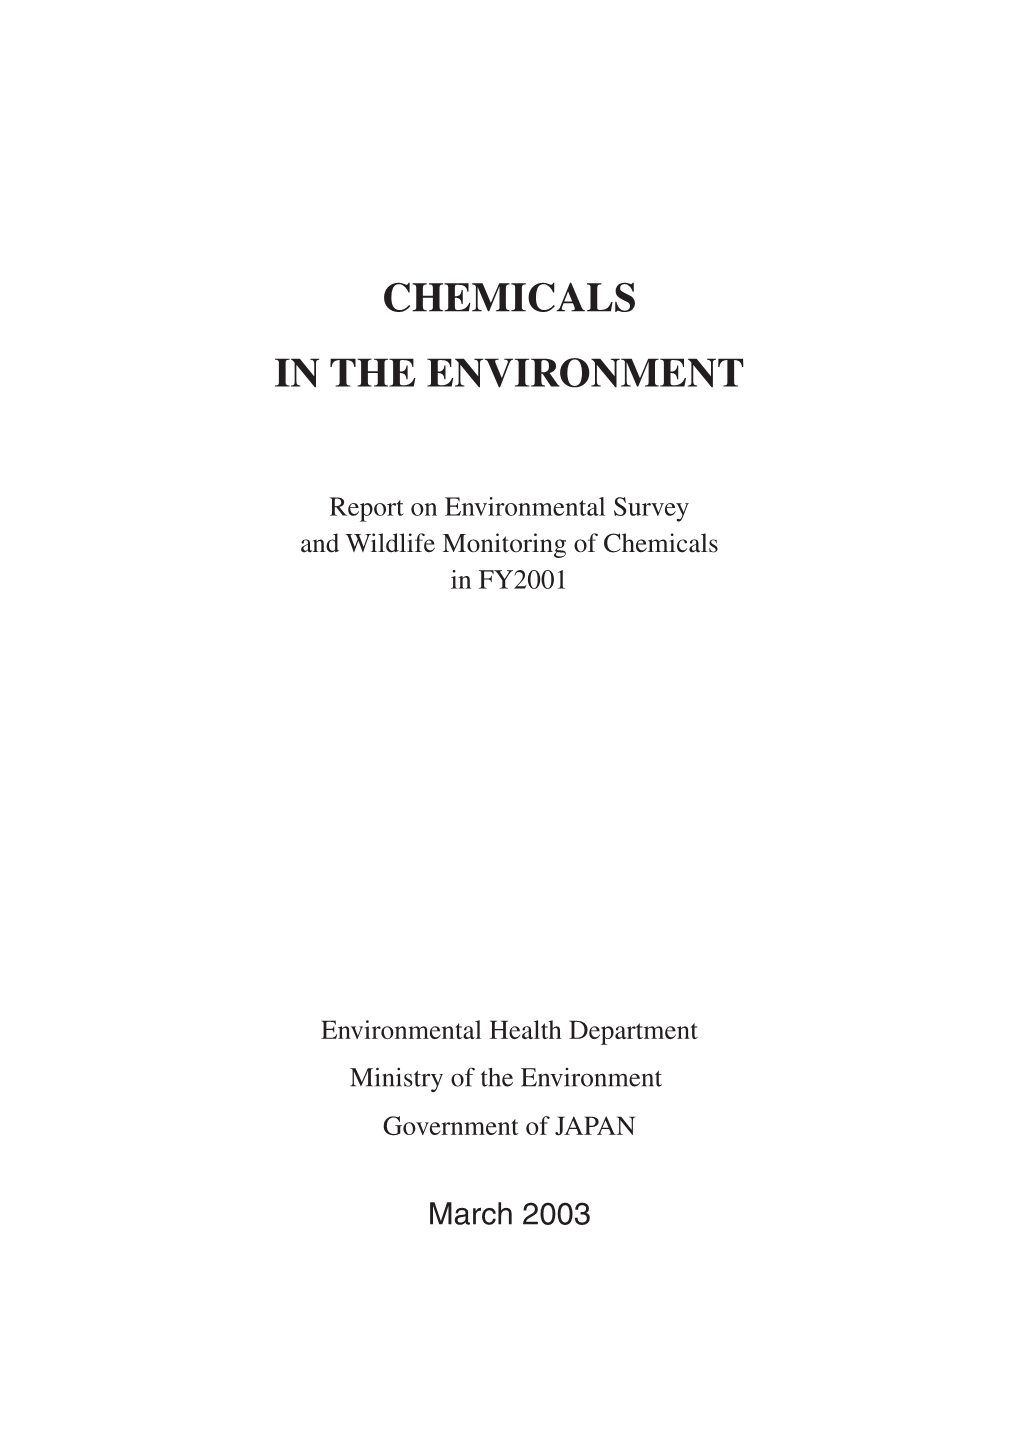 Chemicals in the Environment (FY2001)